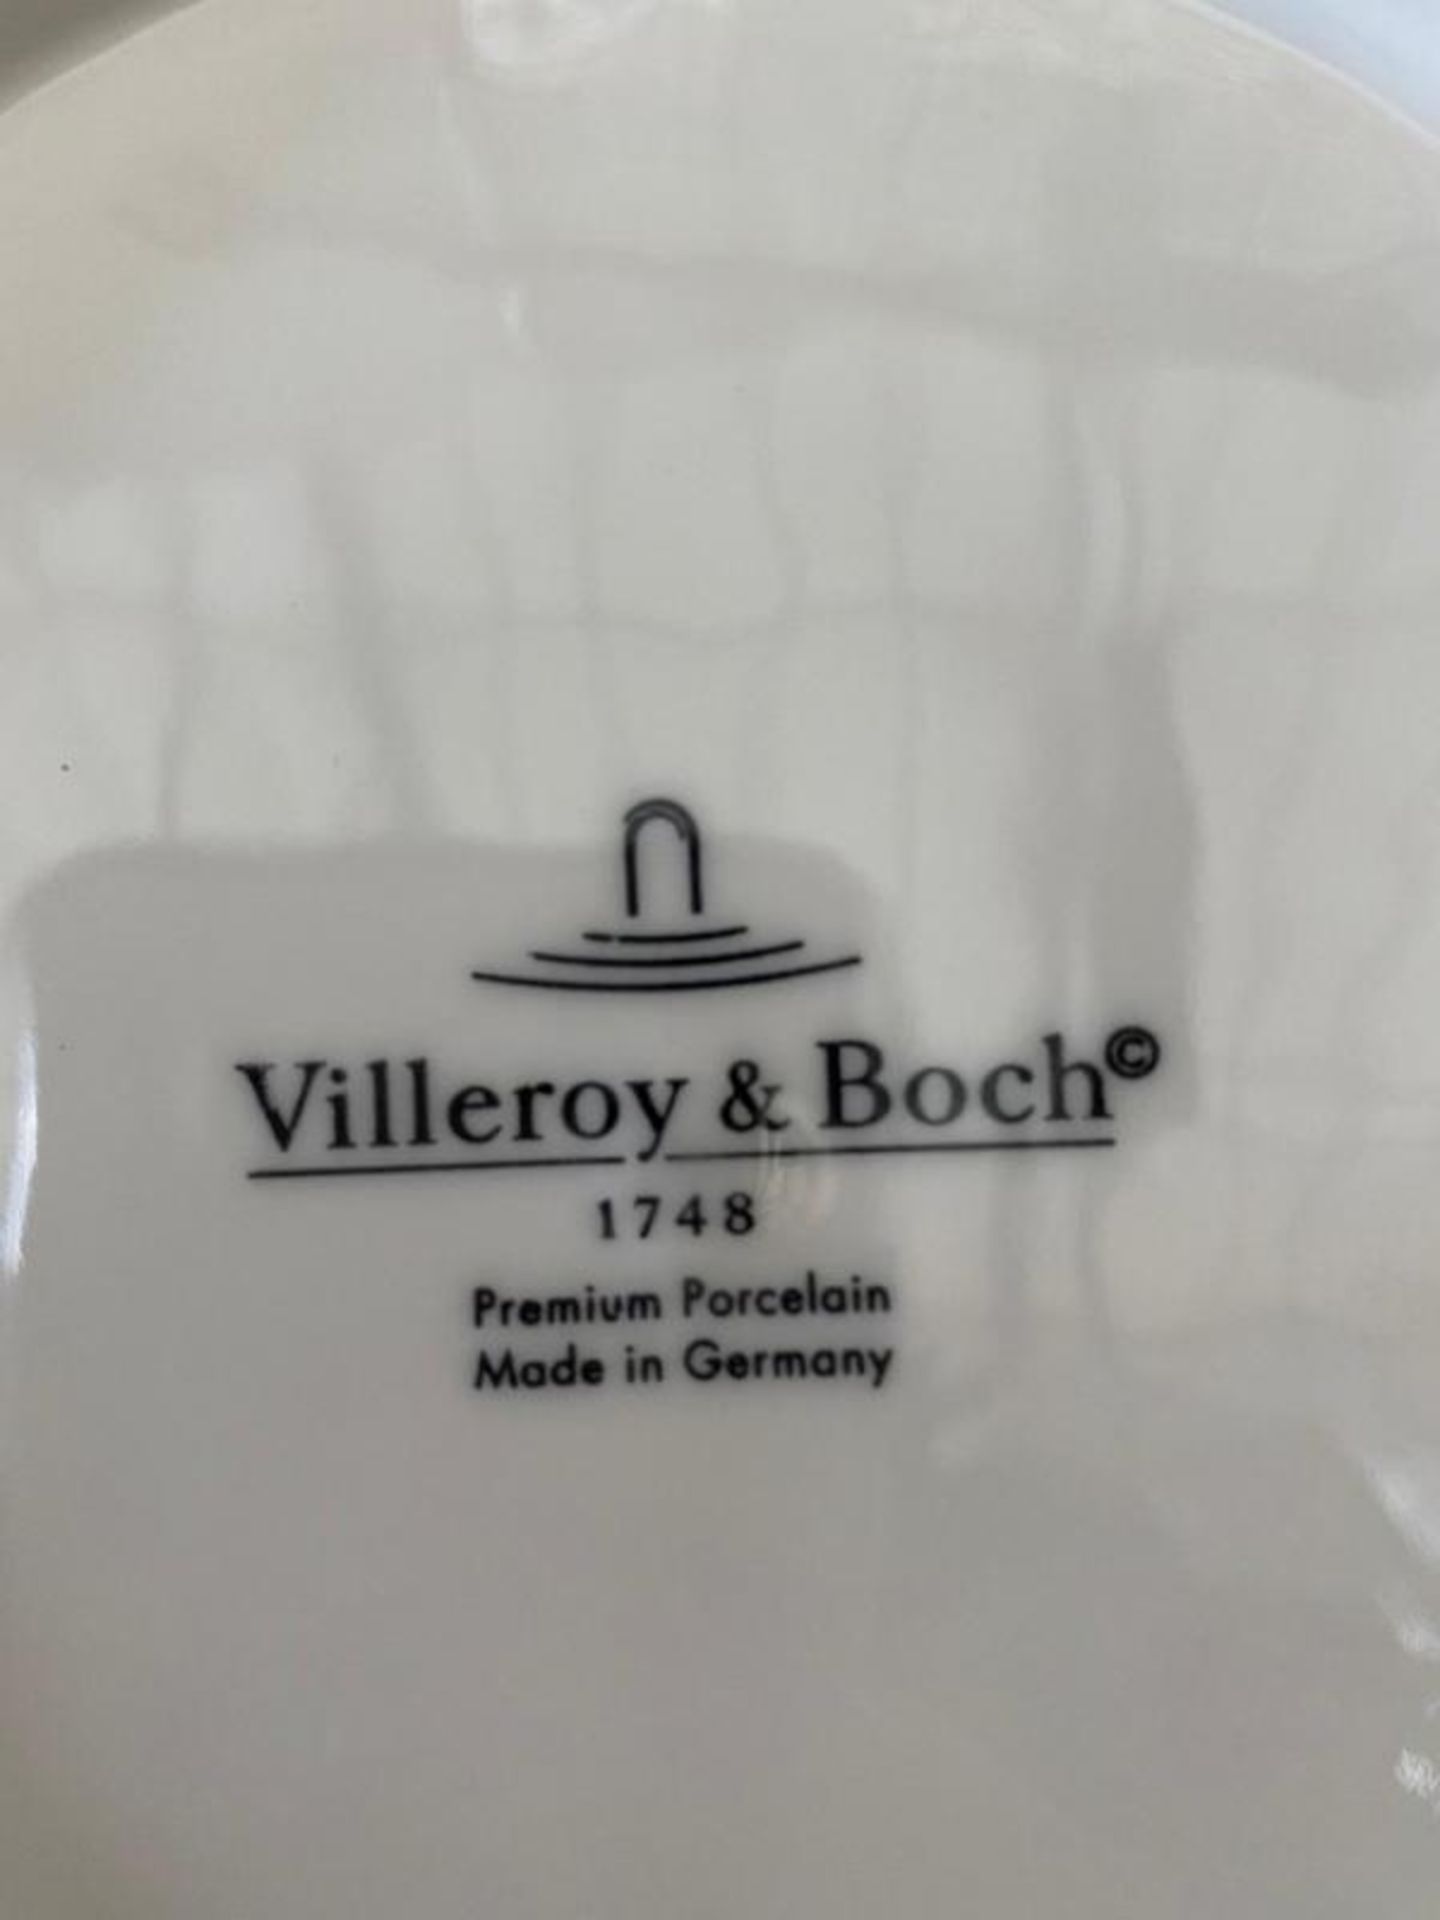 10 x Villeroy & Boch Royal Dinner Plate -290mm (29cm) - Ref: 1044122620 - New and unused without box - Image 3 of 5